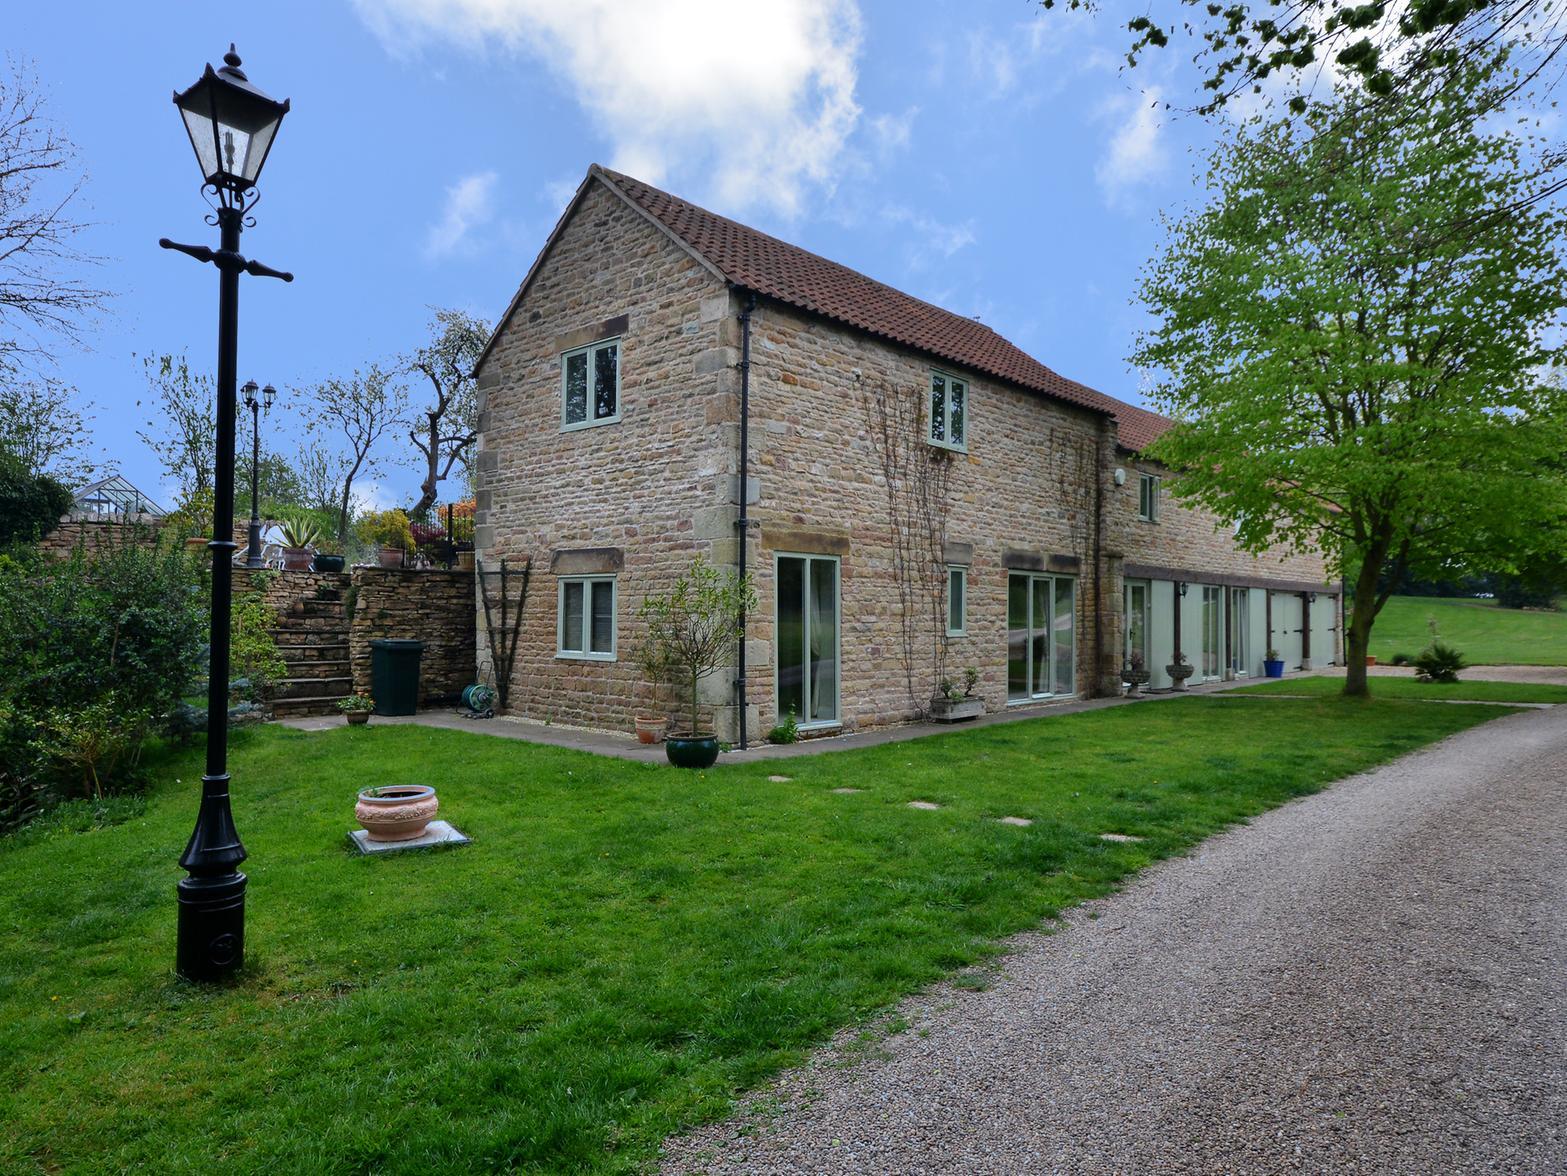 This three-bedroom stone cottage on the grounds of the manor was built in 2013.